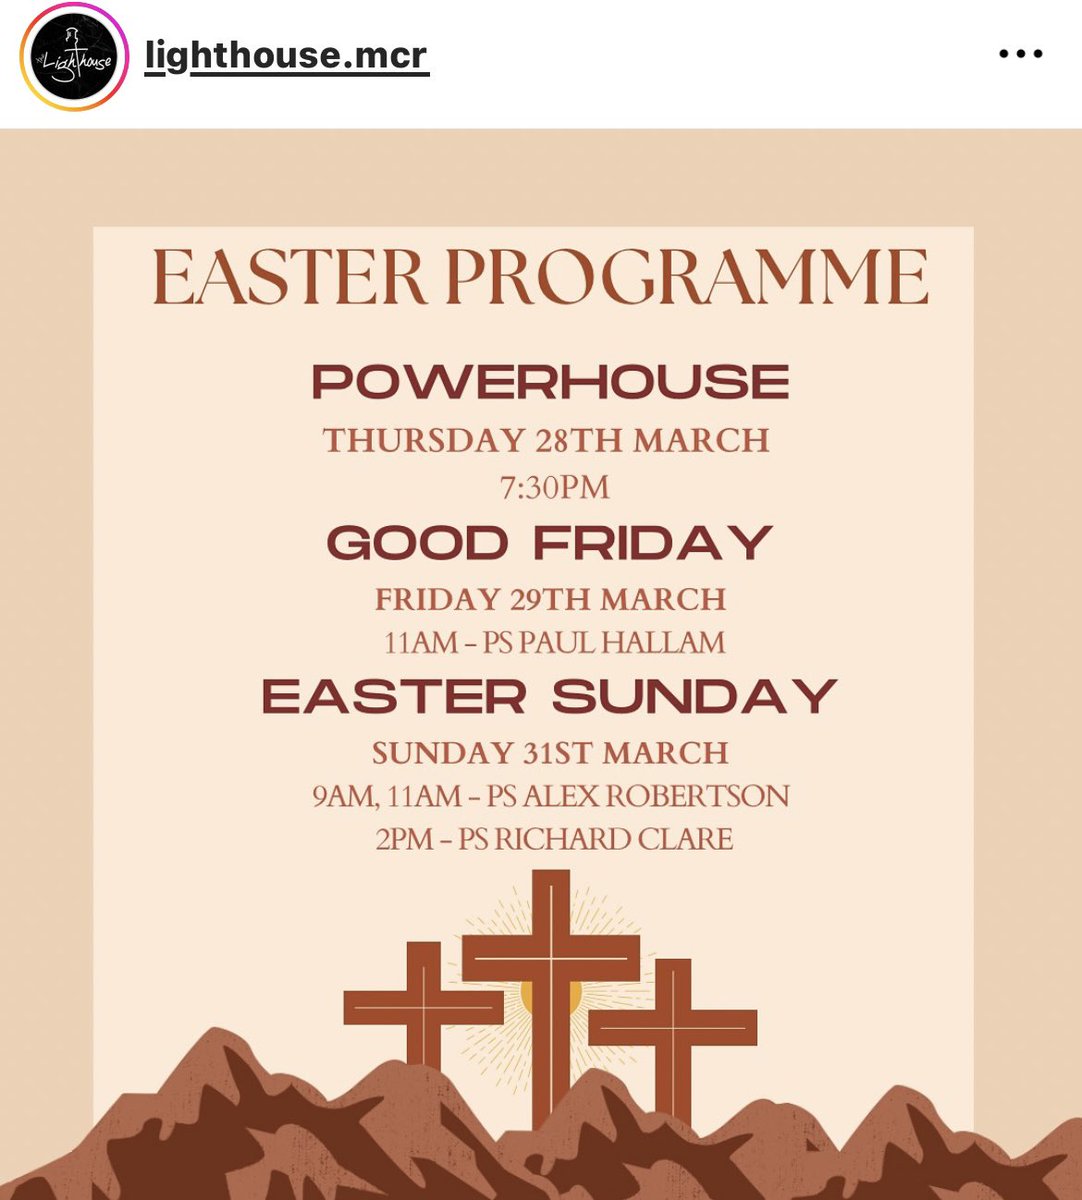 Easter at The Lighthouse Manchester and Salford 💥💥💥 #localchurch #lighthousechurch